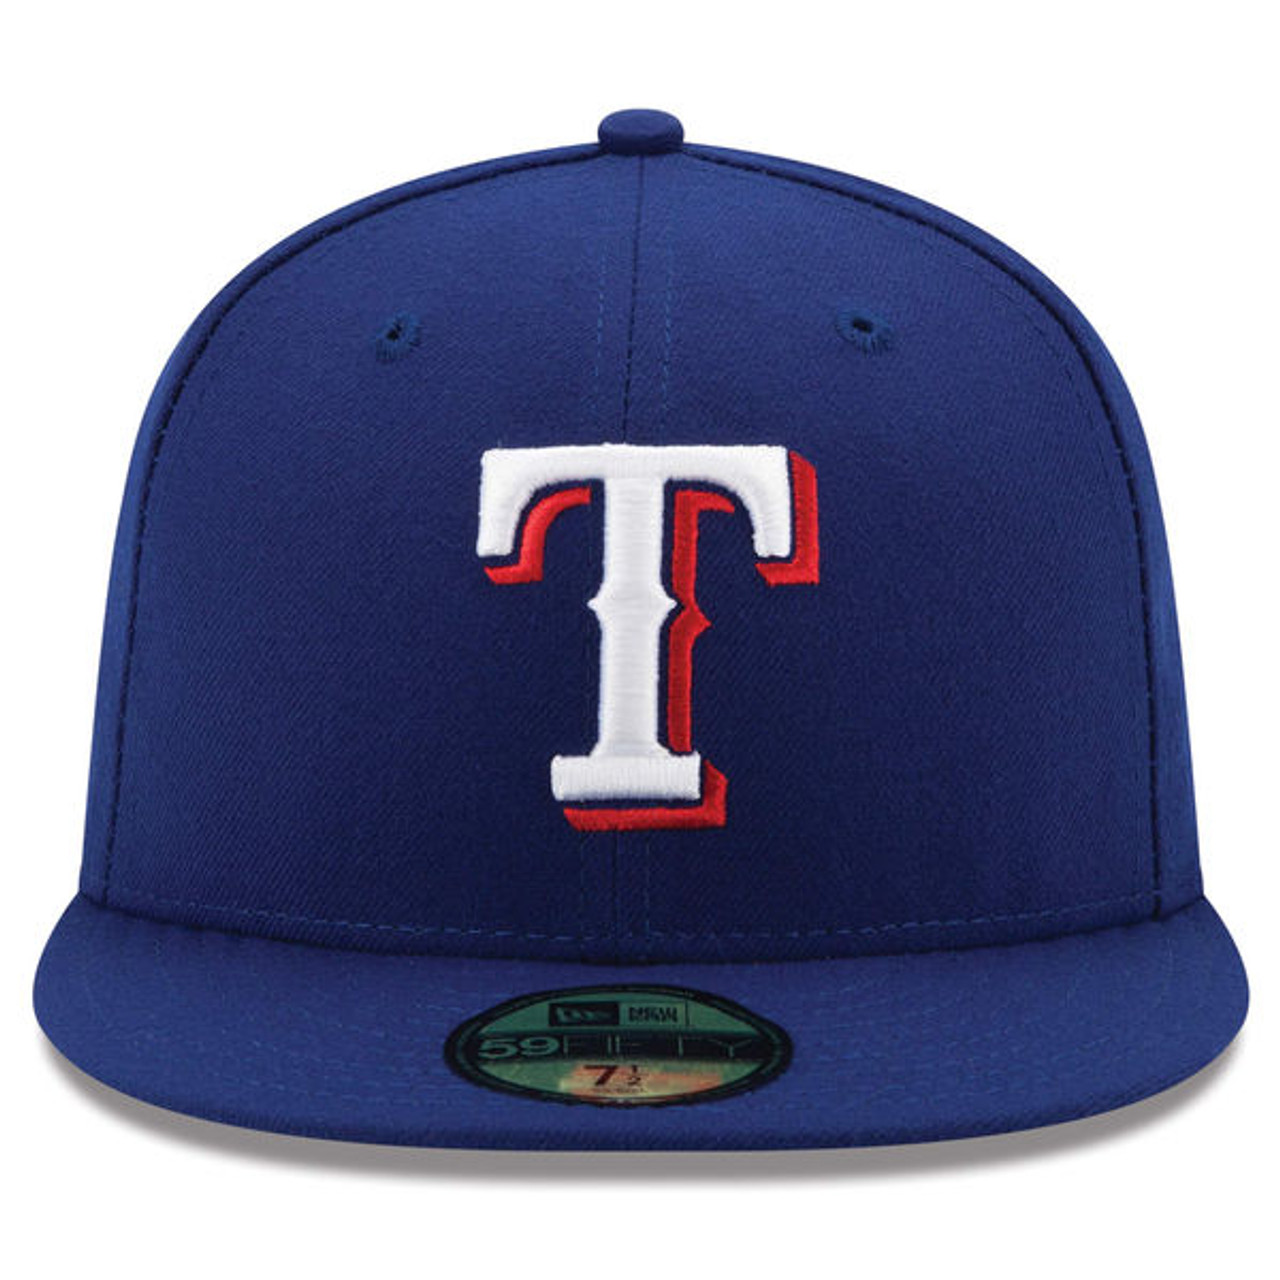 Texas Rangers New Era Pi Black Metallic Side Patch 59FIFTY Fitted Hat, 7 7/8 / Black